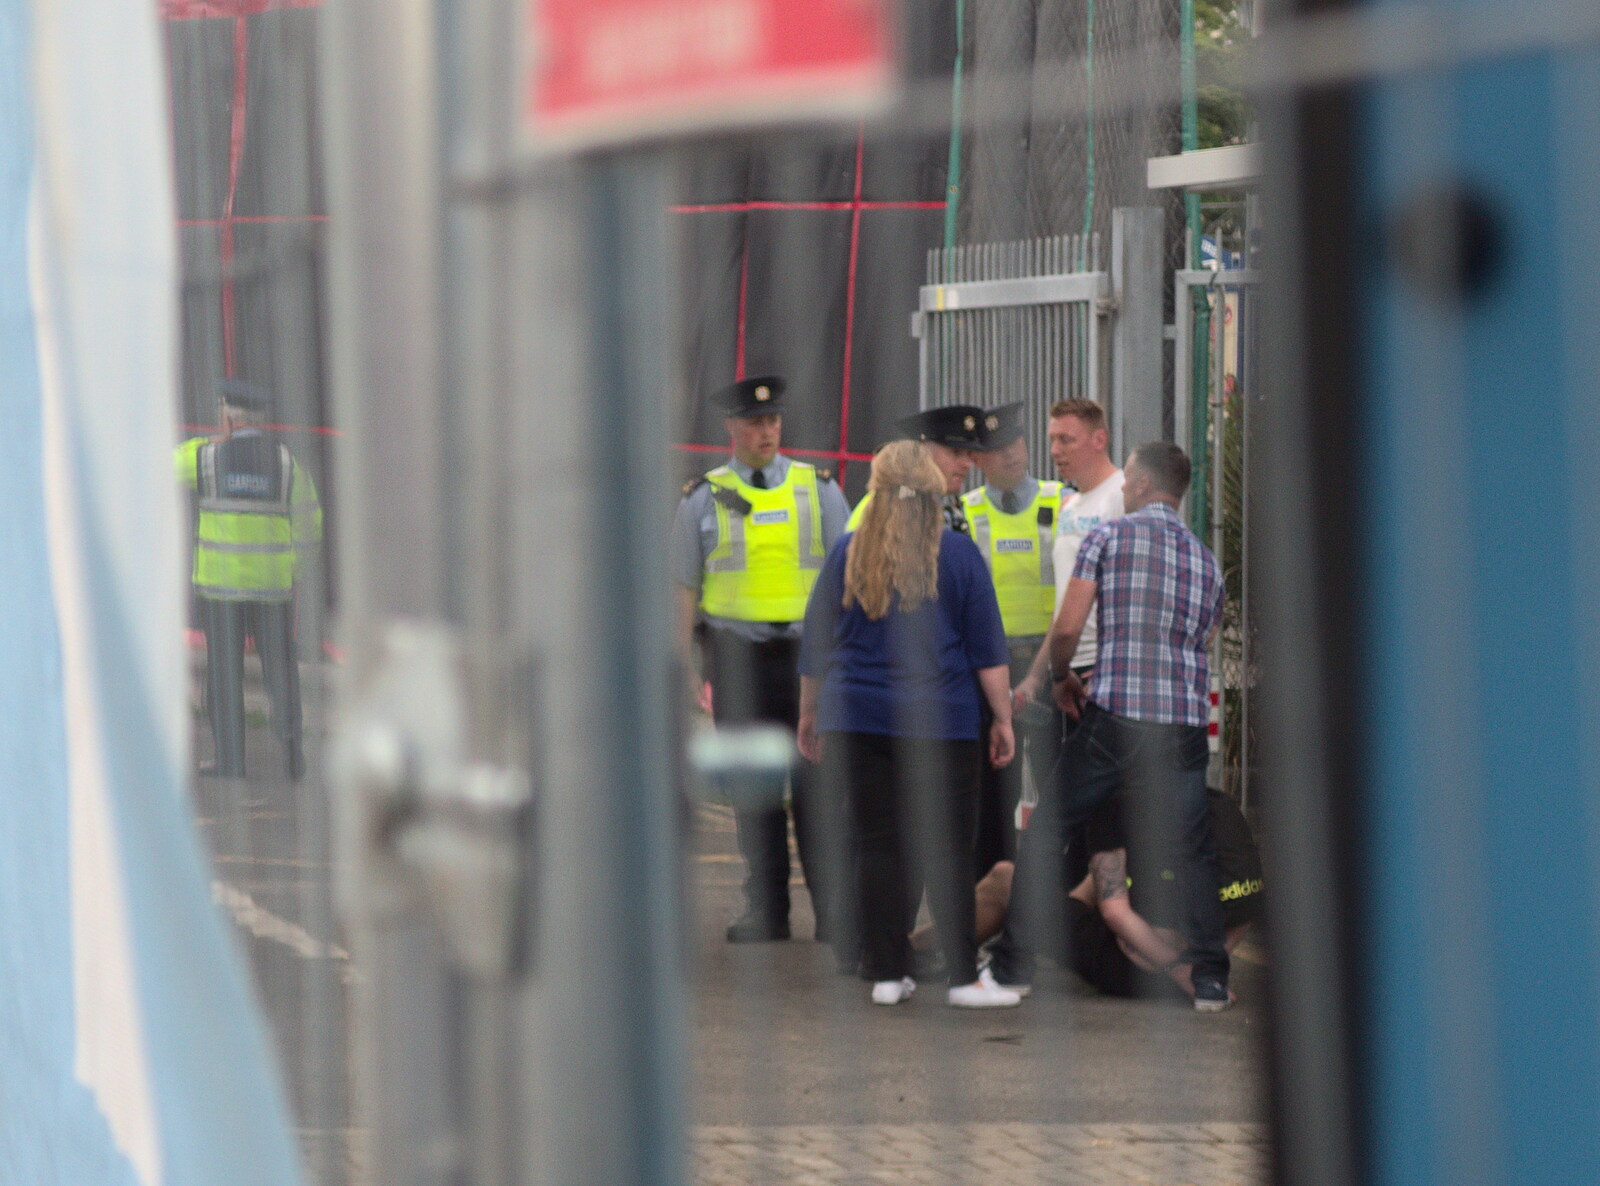 The gardai bring down some drug dealer or something from Beatyard Festival, Dún Laoghaire, County Dublin, Ireland - 5th August 2018